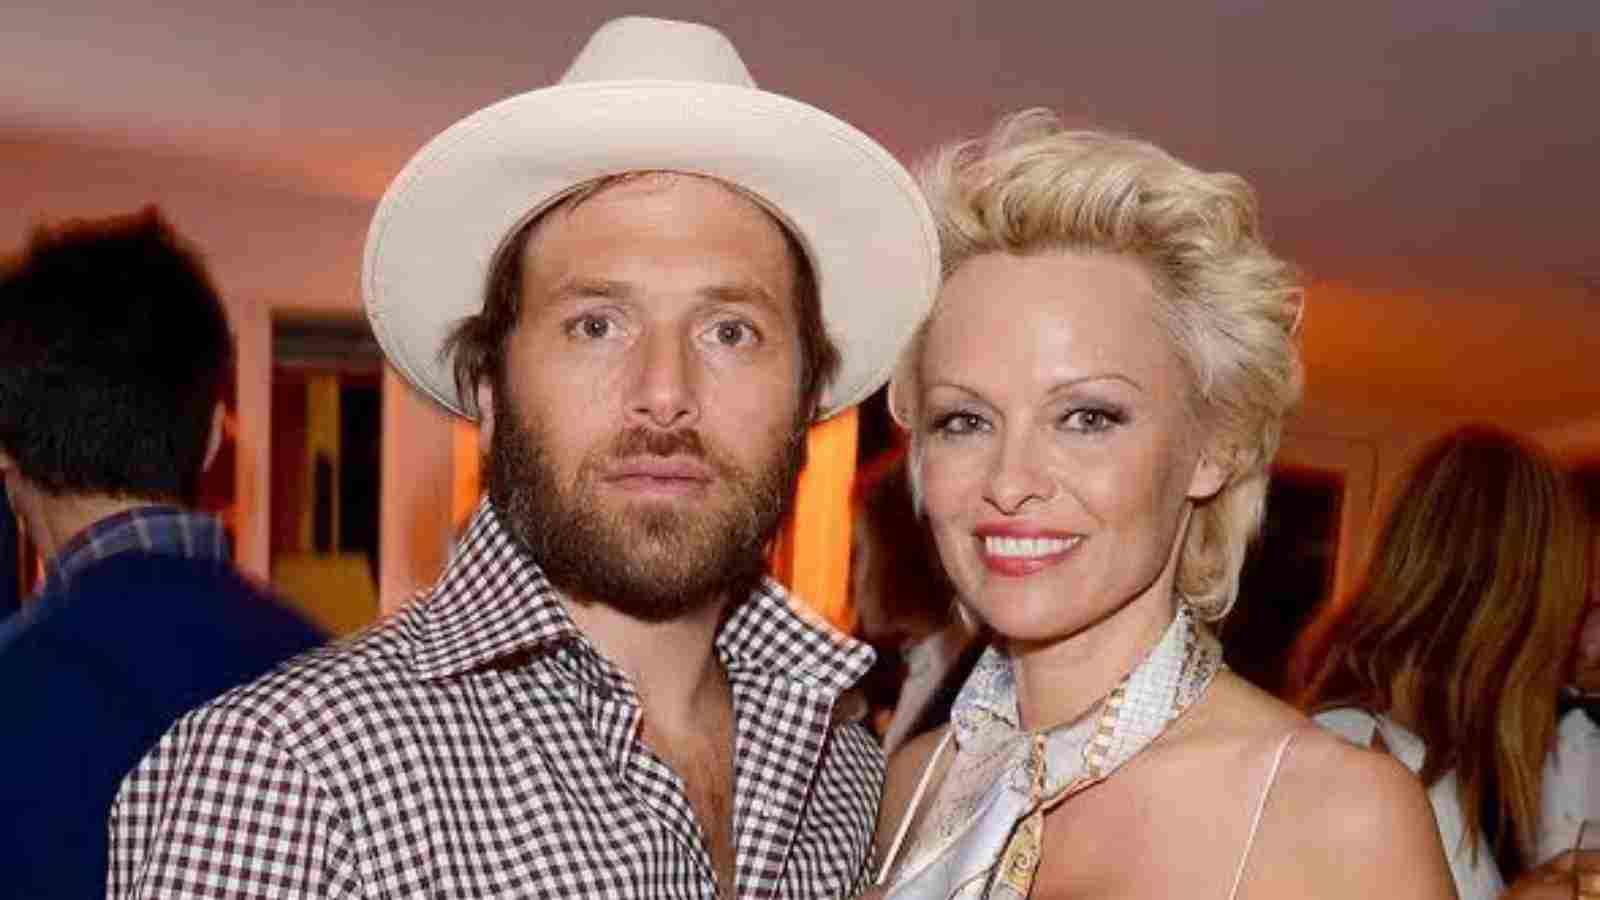 Pamela Anderson's first marriage with Rick Salomon happened in Las Vegas